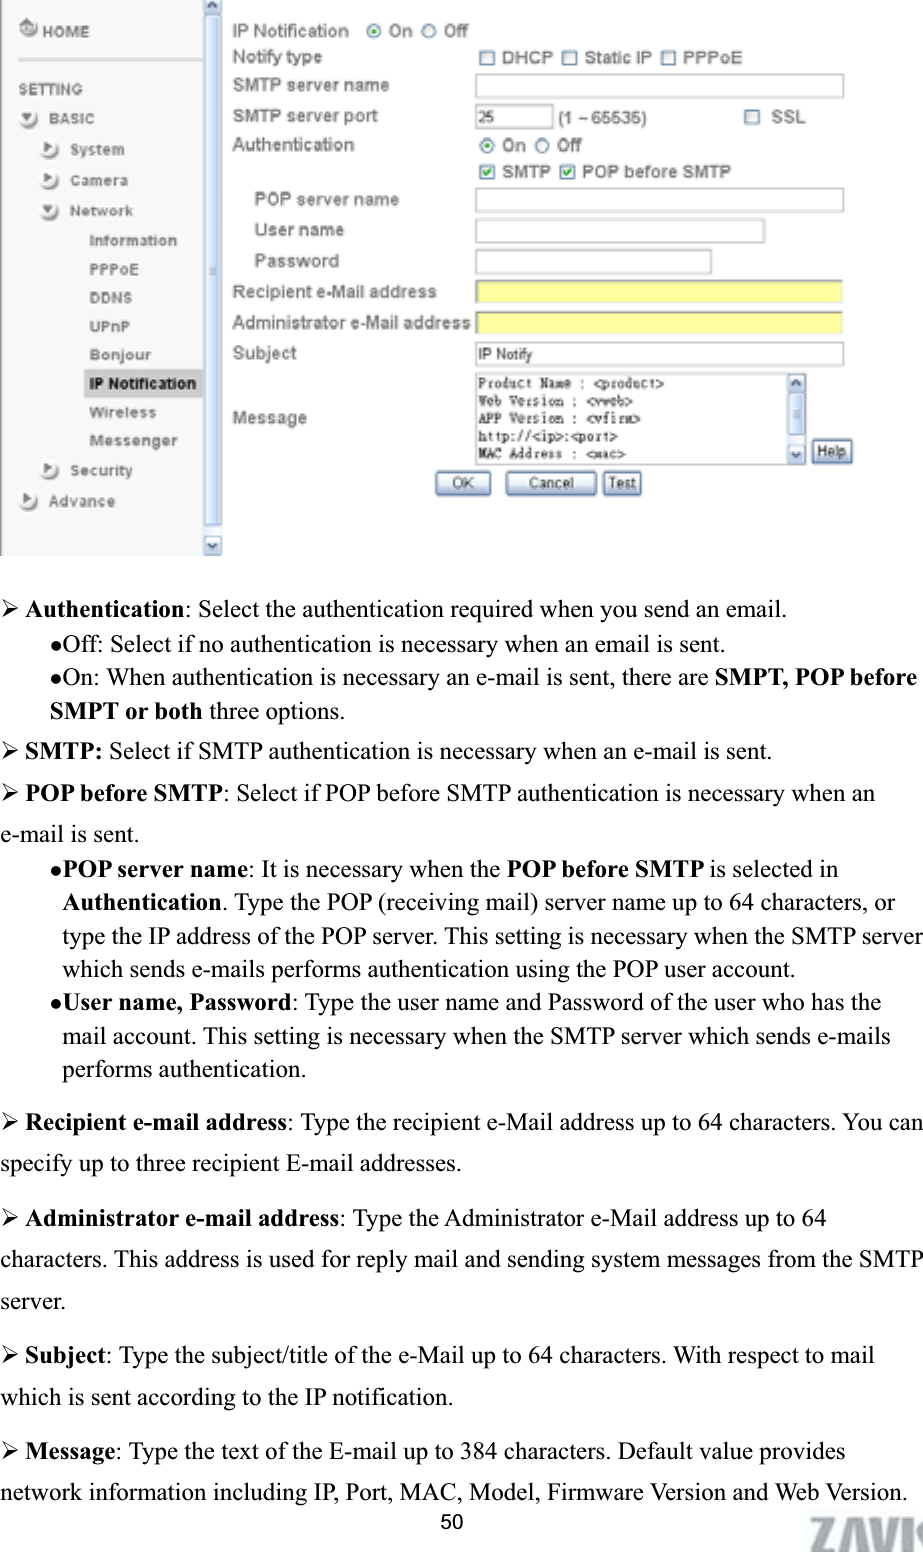      ¾Authentication: Select the authentication required when you send an email.   zOff: Select if no authentication is necessary when an email is sent. zOn: When authentication is necessary an e-mail is sent, there are SMPT, POP before SMPT or both three options.   ¾SMTP: Select if SMTP authentication is necessary when an e-mail is sent. ¾POP before SMTP: Select if POP before SMTP authentication is necessary when an e-mail is sent. zPOP server name: It is necessary when the POP before SMTP is selected in Authentication. Type the POP (receiving mail) server name up to 64 characters, or type the IP address of the POP server. This setting is necessary when the SMTP server which sends e-mails performs authentication using the POP user account.   zUser name, Password: Type the user name and Password of the user who has the mail account. This setting is necessary when the SMTP server which sends e-mails performs authentication. ¾Recipient e-mail address: Type the recipient e-Mail address up to 64 characters. You can specify up to three recipient E-mail addresses. ¾Administrator e-mail address: Type the Administrator e-Mail address up to 64 characters. This address is used for reply mail and sending system messages from the SMTP server. ¾Subject: Type the subject/title of the e-Mail up to 64 characters. With respect to mail which is sent according to the IP notification. 50¾Message: Type the text of the E-mail up to 384 characters. Default value provides network information including IP, Port, MAC, Model, Firmware Version and Web Version. 